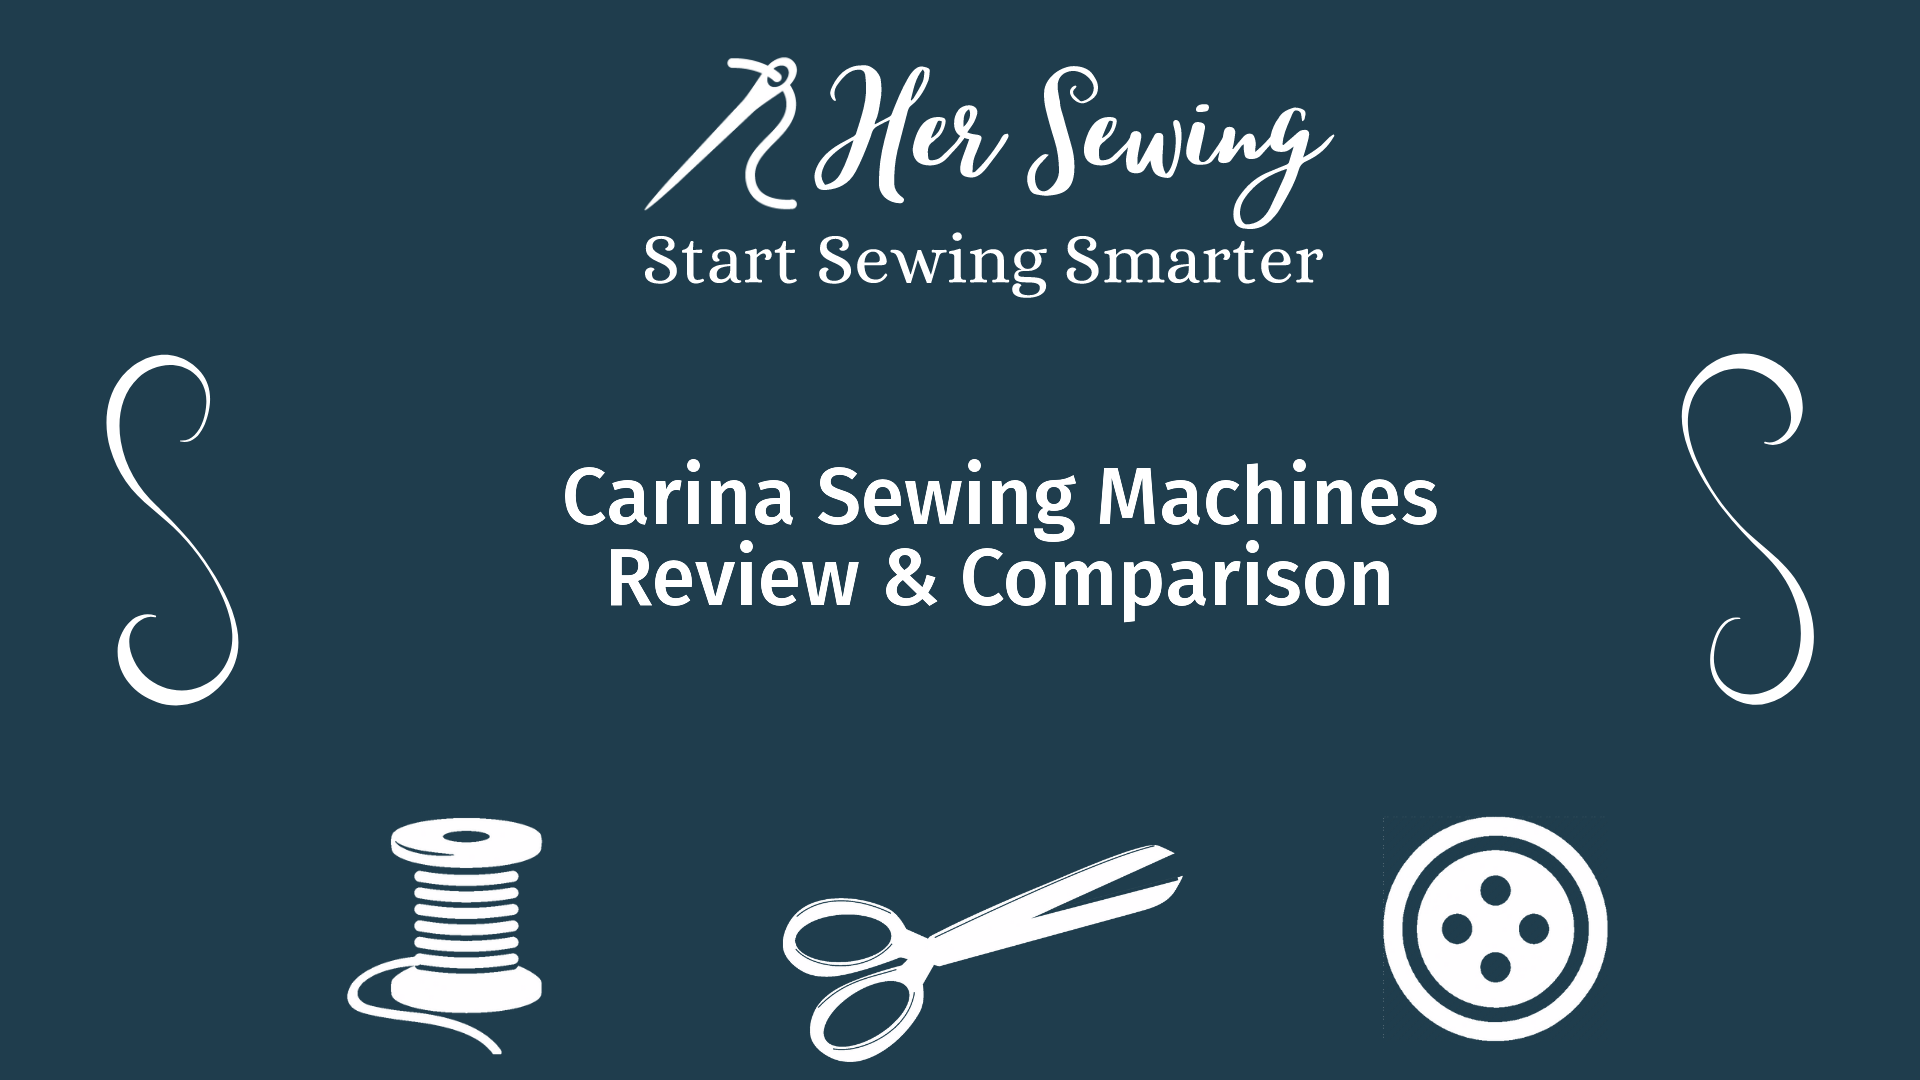 Carina Sewing Machines Review & Comparison